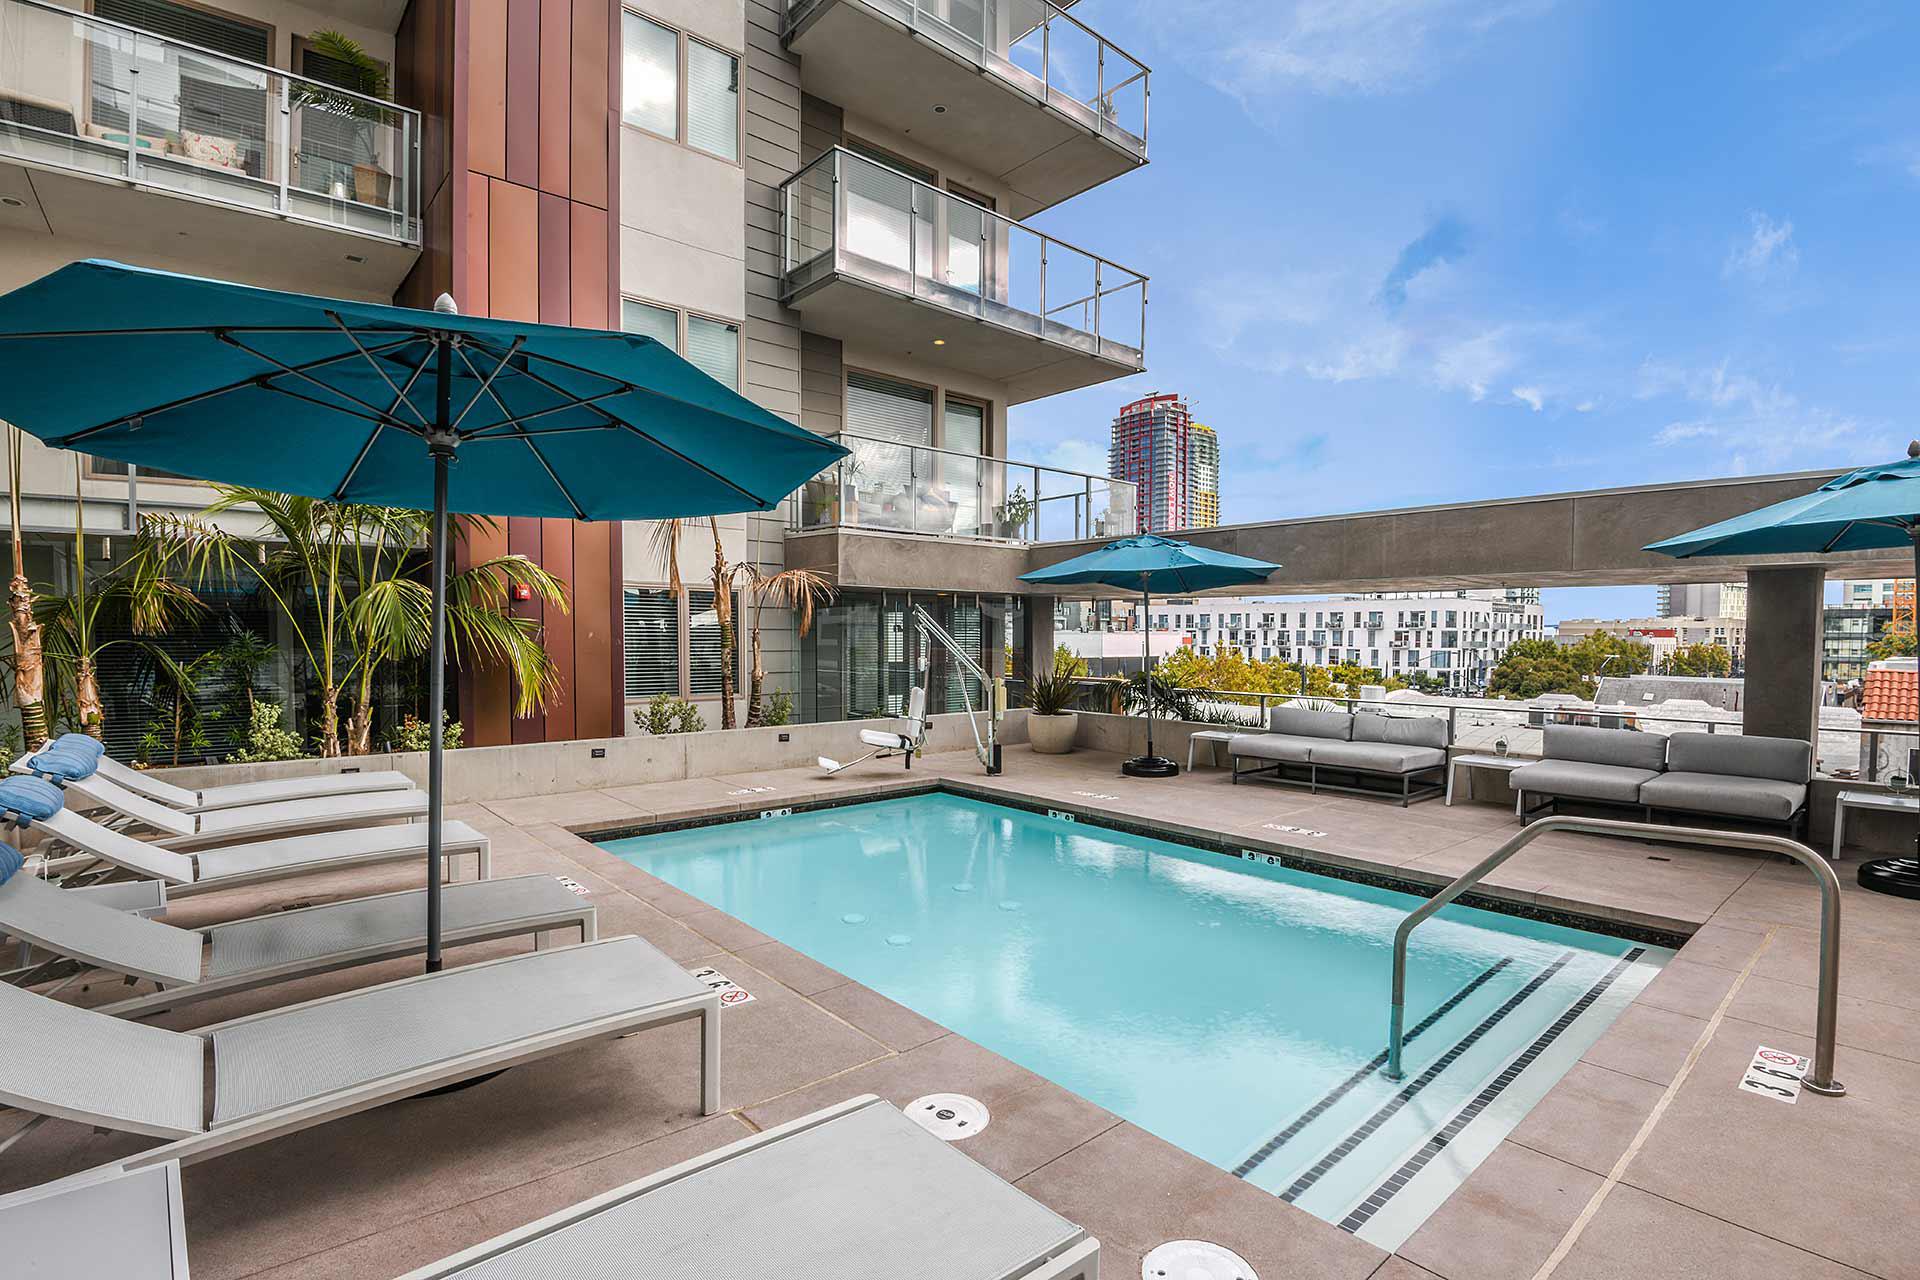 Resort-Style Pool at F11 East Village Luxury Apartments in downtown San Diego, CA